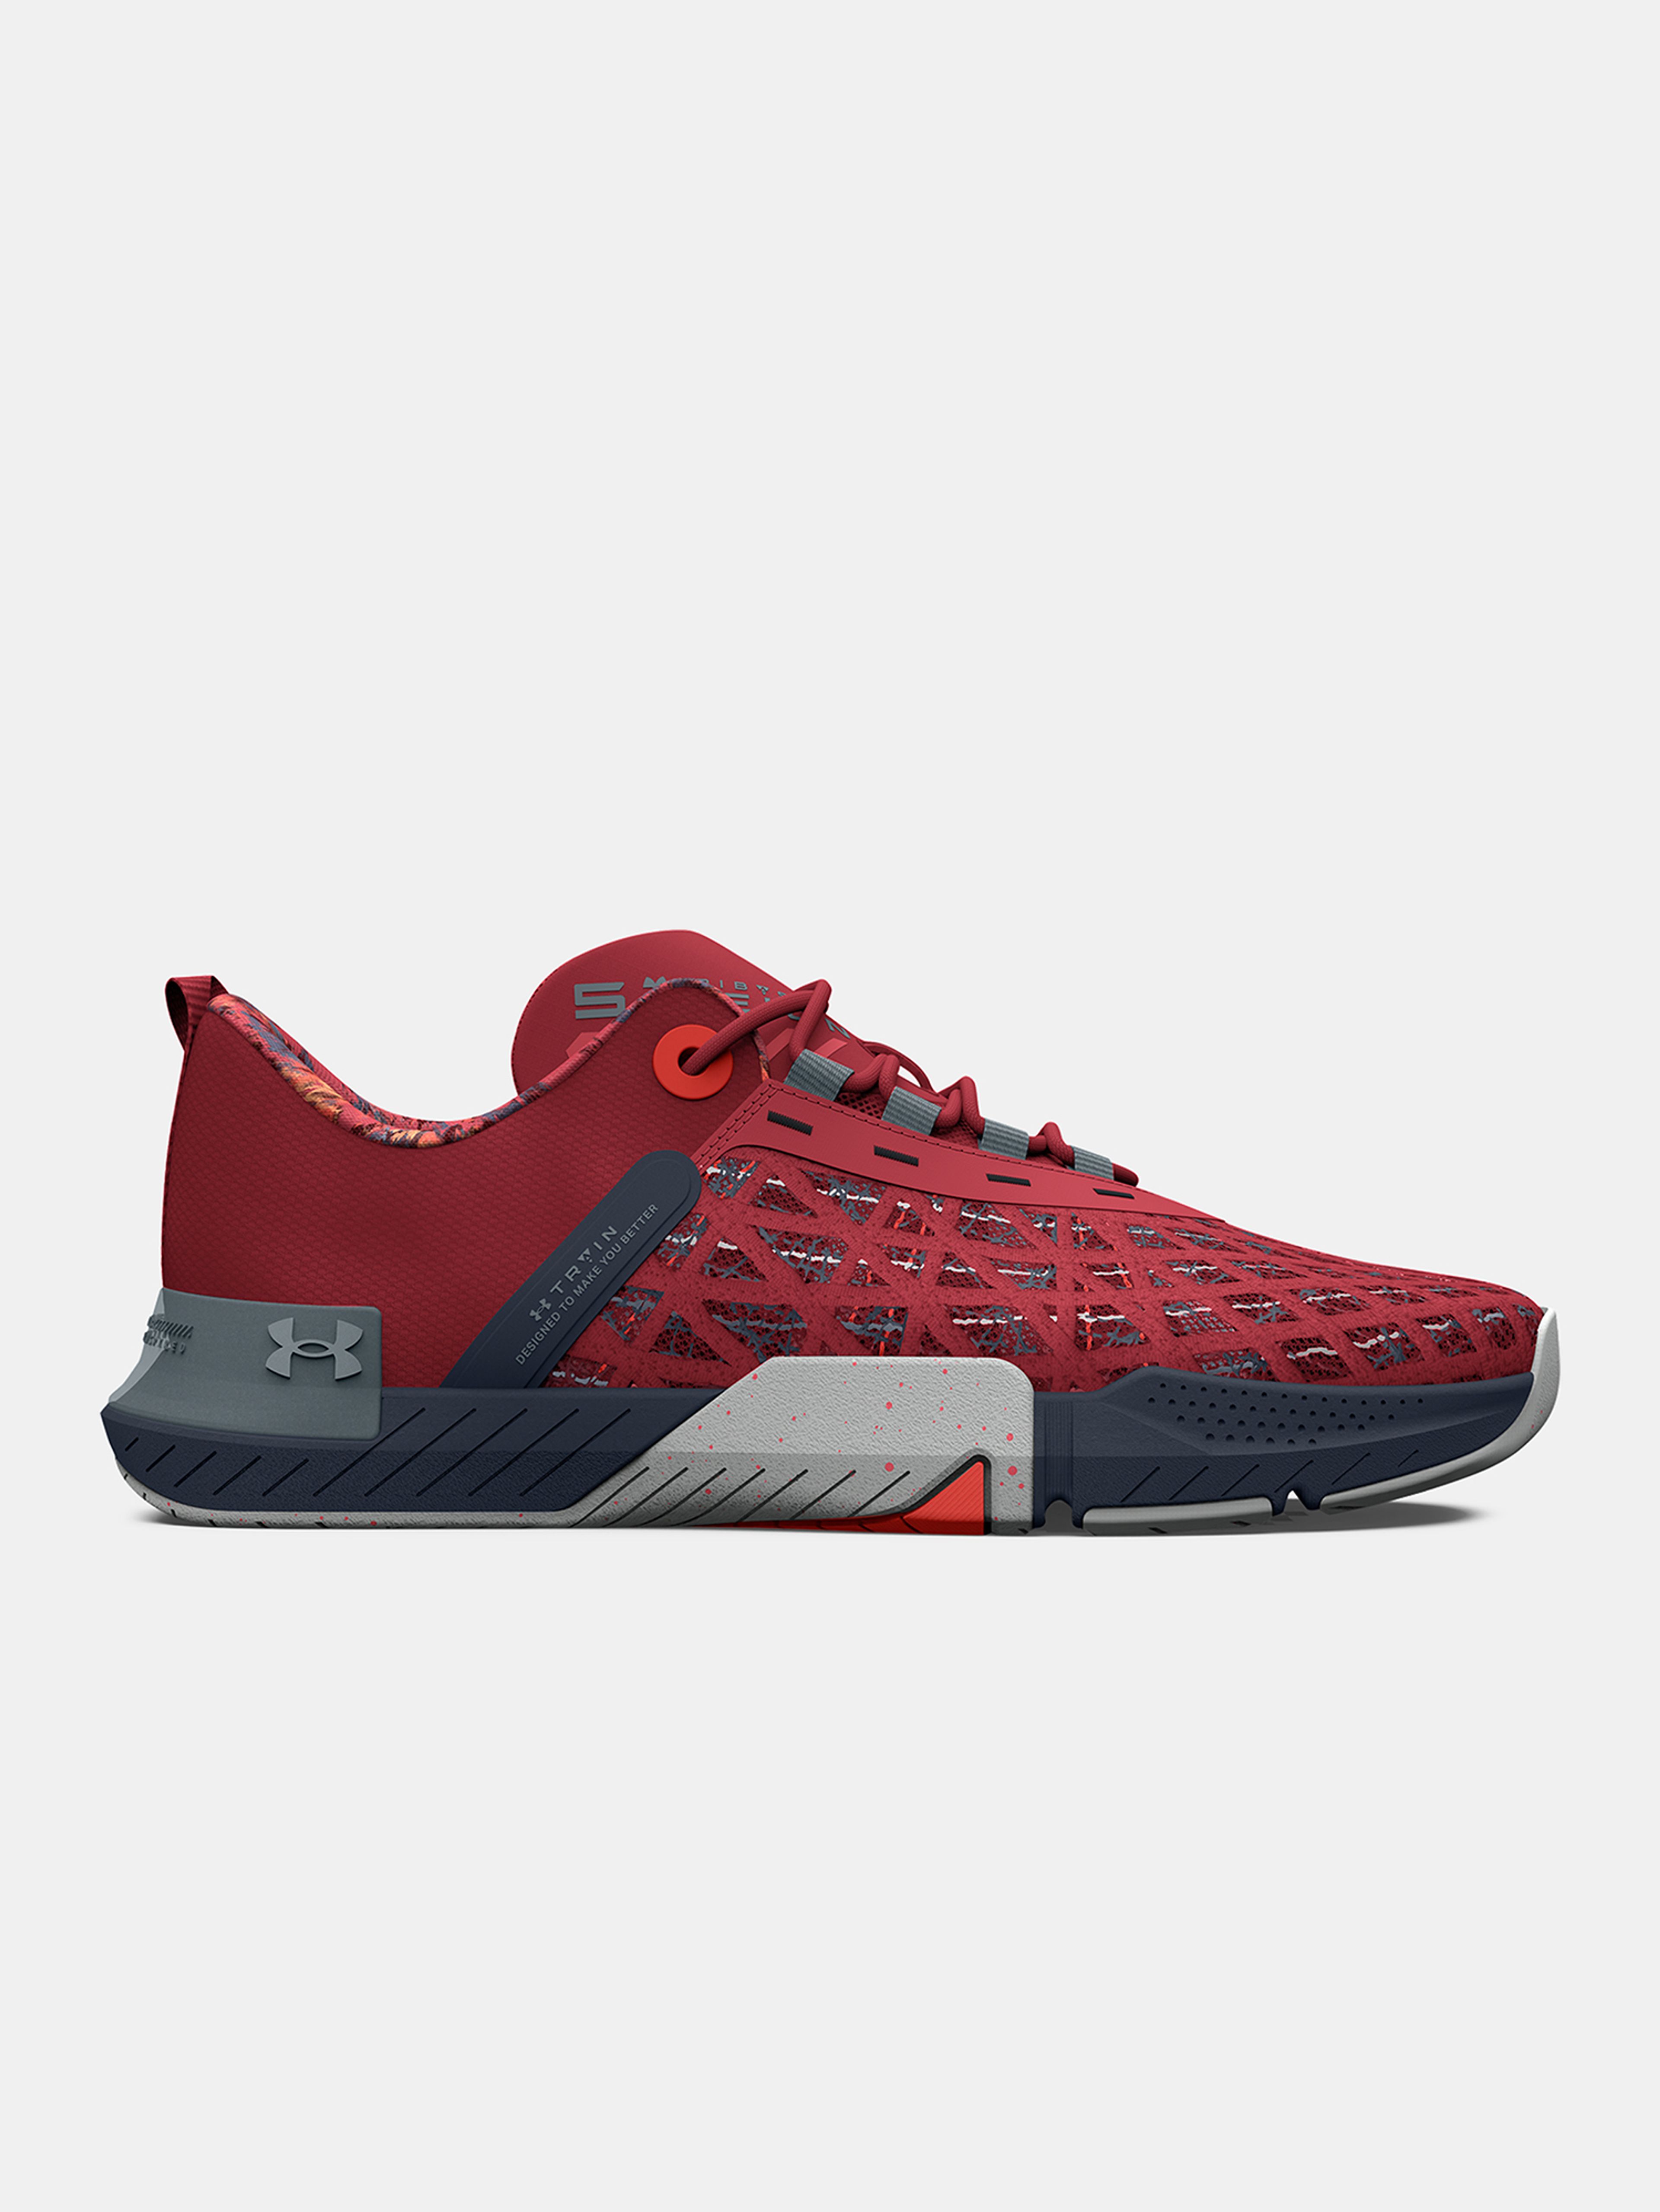 Boty Under Armour UA TriBase Reign 5 Q1-RED